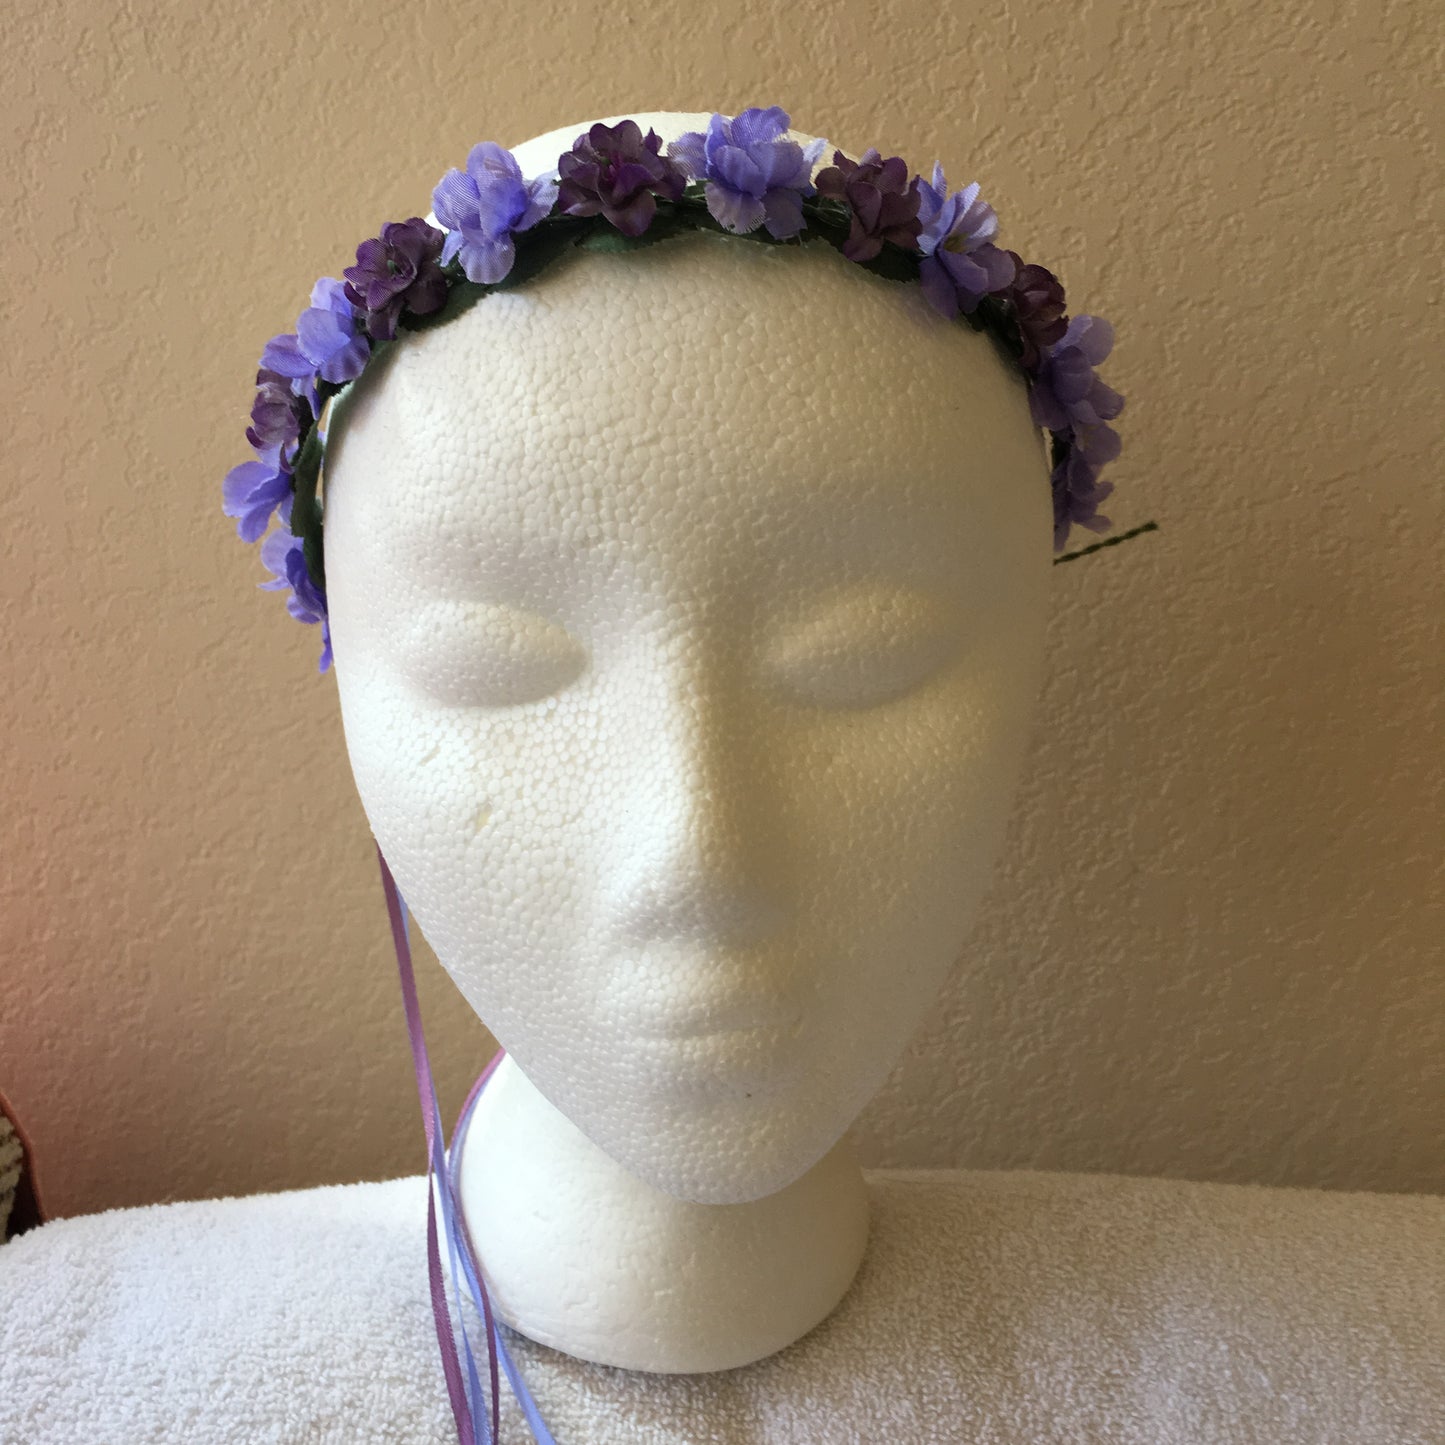 Extra Small Wreath - Two purple flowers